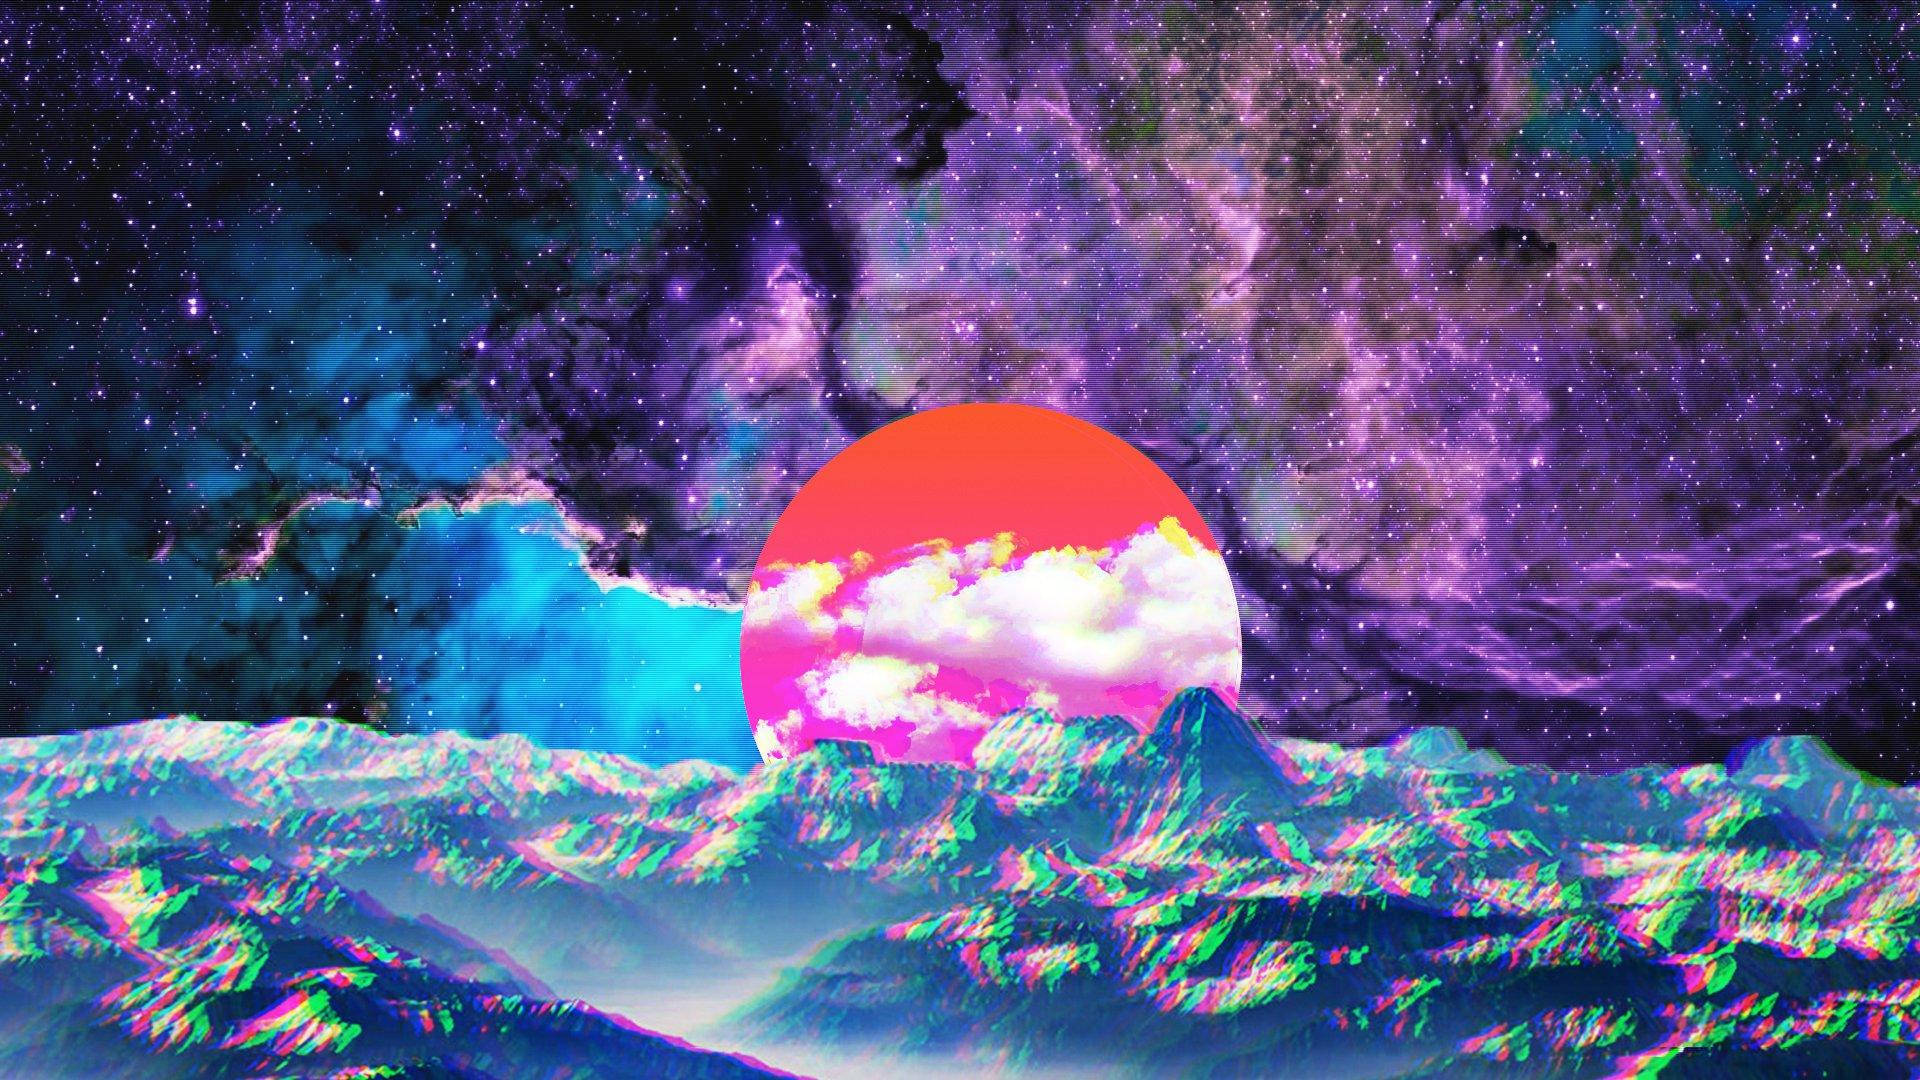 Glitchy Mountain And Galactic Universe Cover